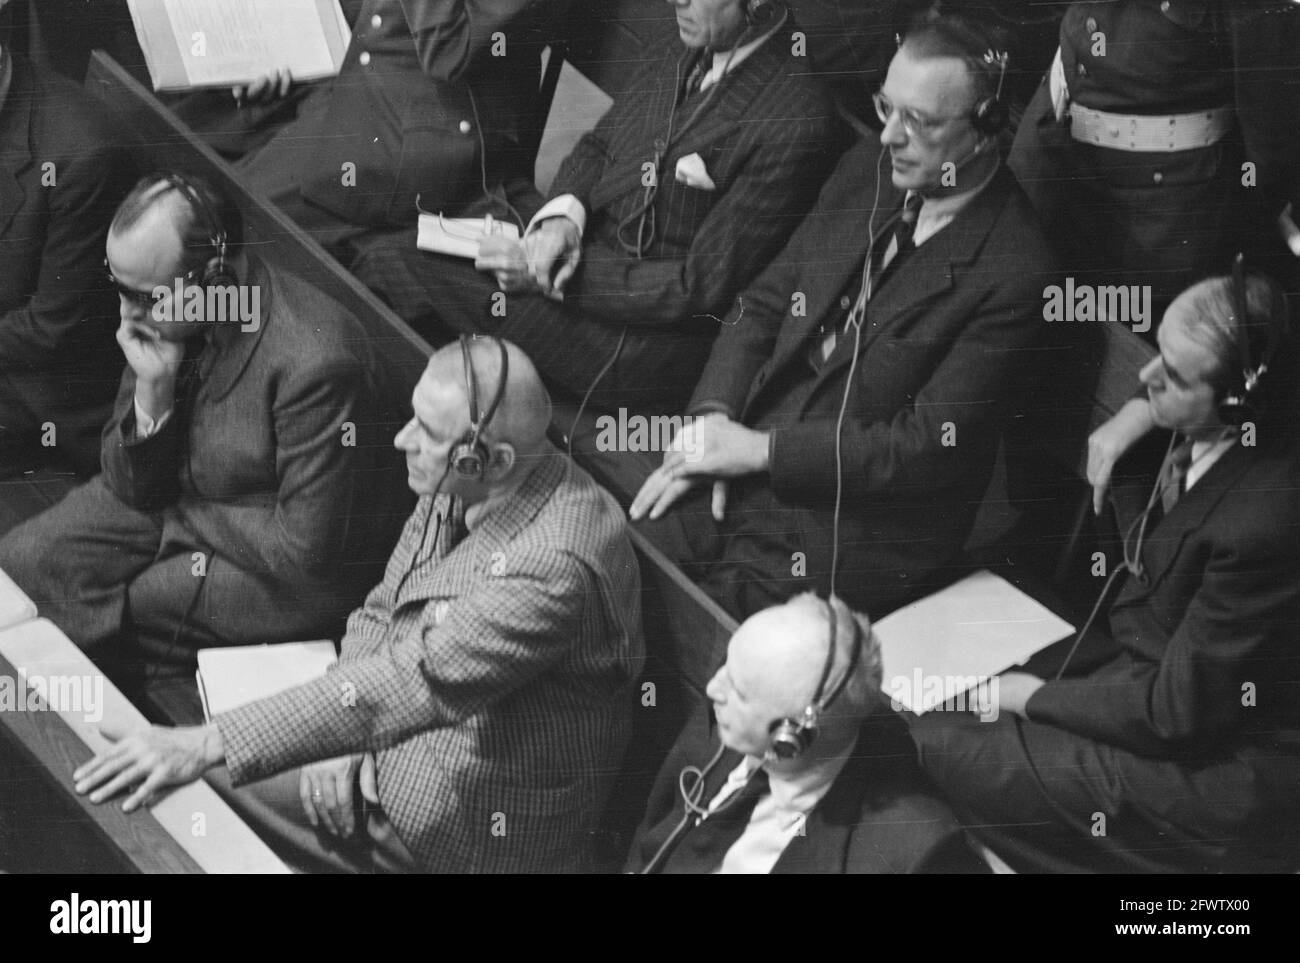 Nuremberg Trial. Accused; with glasses Arthur Seyss-Inquart, on right next to him Albert Speer, December 4, 1945, war criminals, trials, justice, second world war, The Netherlands, 20th century press agency photo, news to remember, documentary, historic photography 1945-1990, visual stories, human history of the Twentieth Century, capturing moments in time Stock Photo